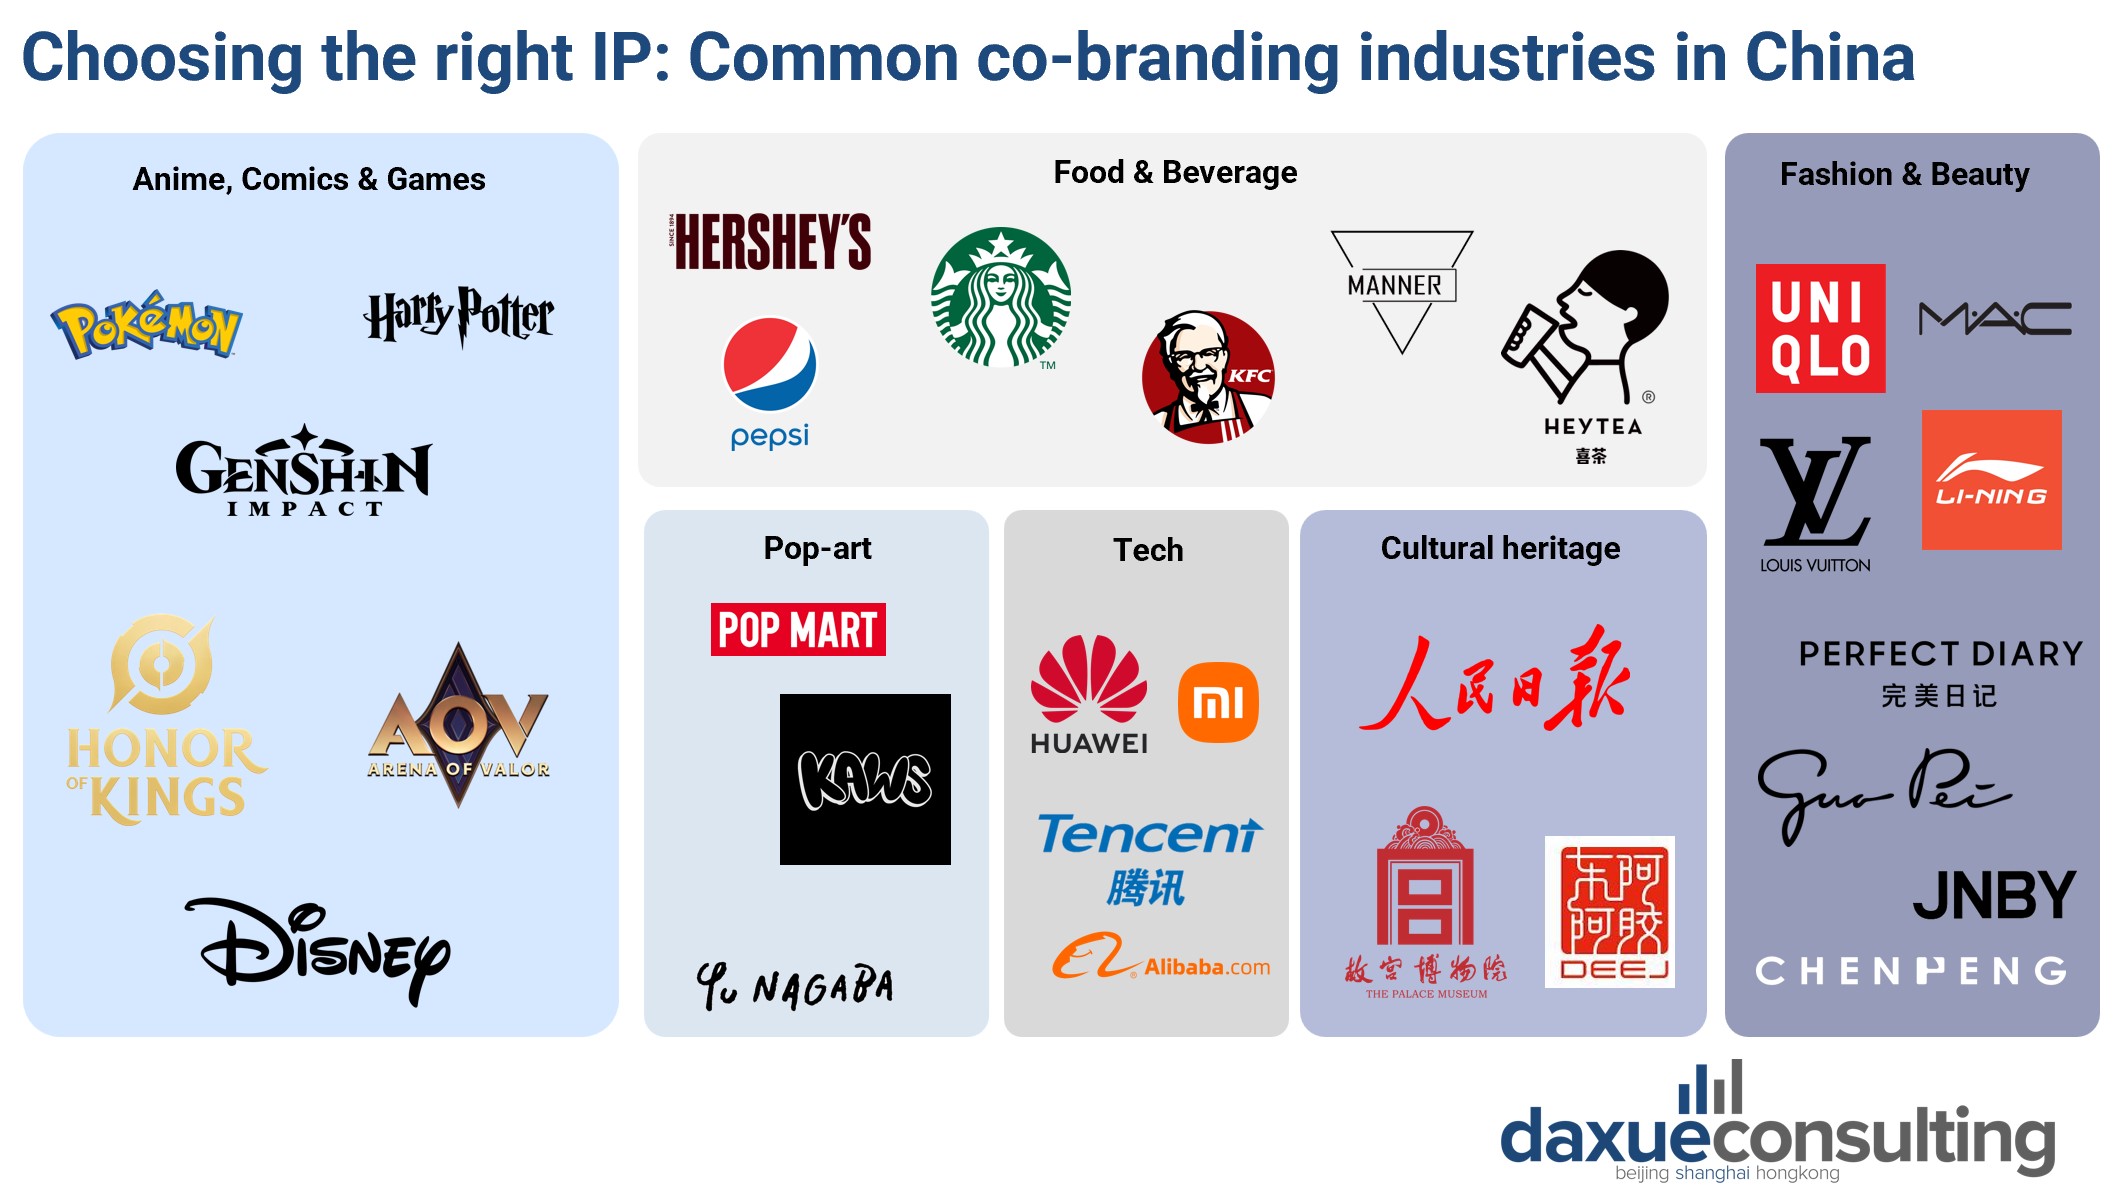 the most common industries for co-branding in China in proportion to the amount of buzz generated on Chinese social media.